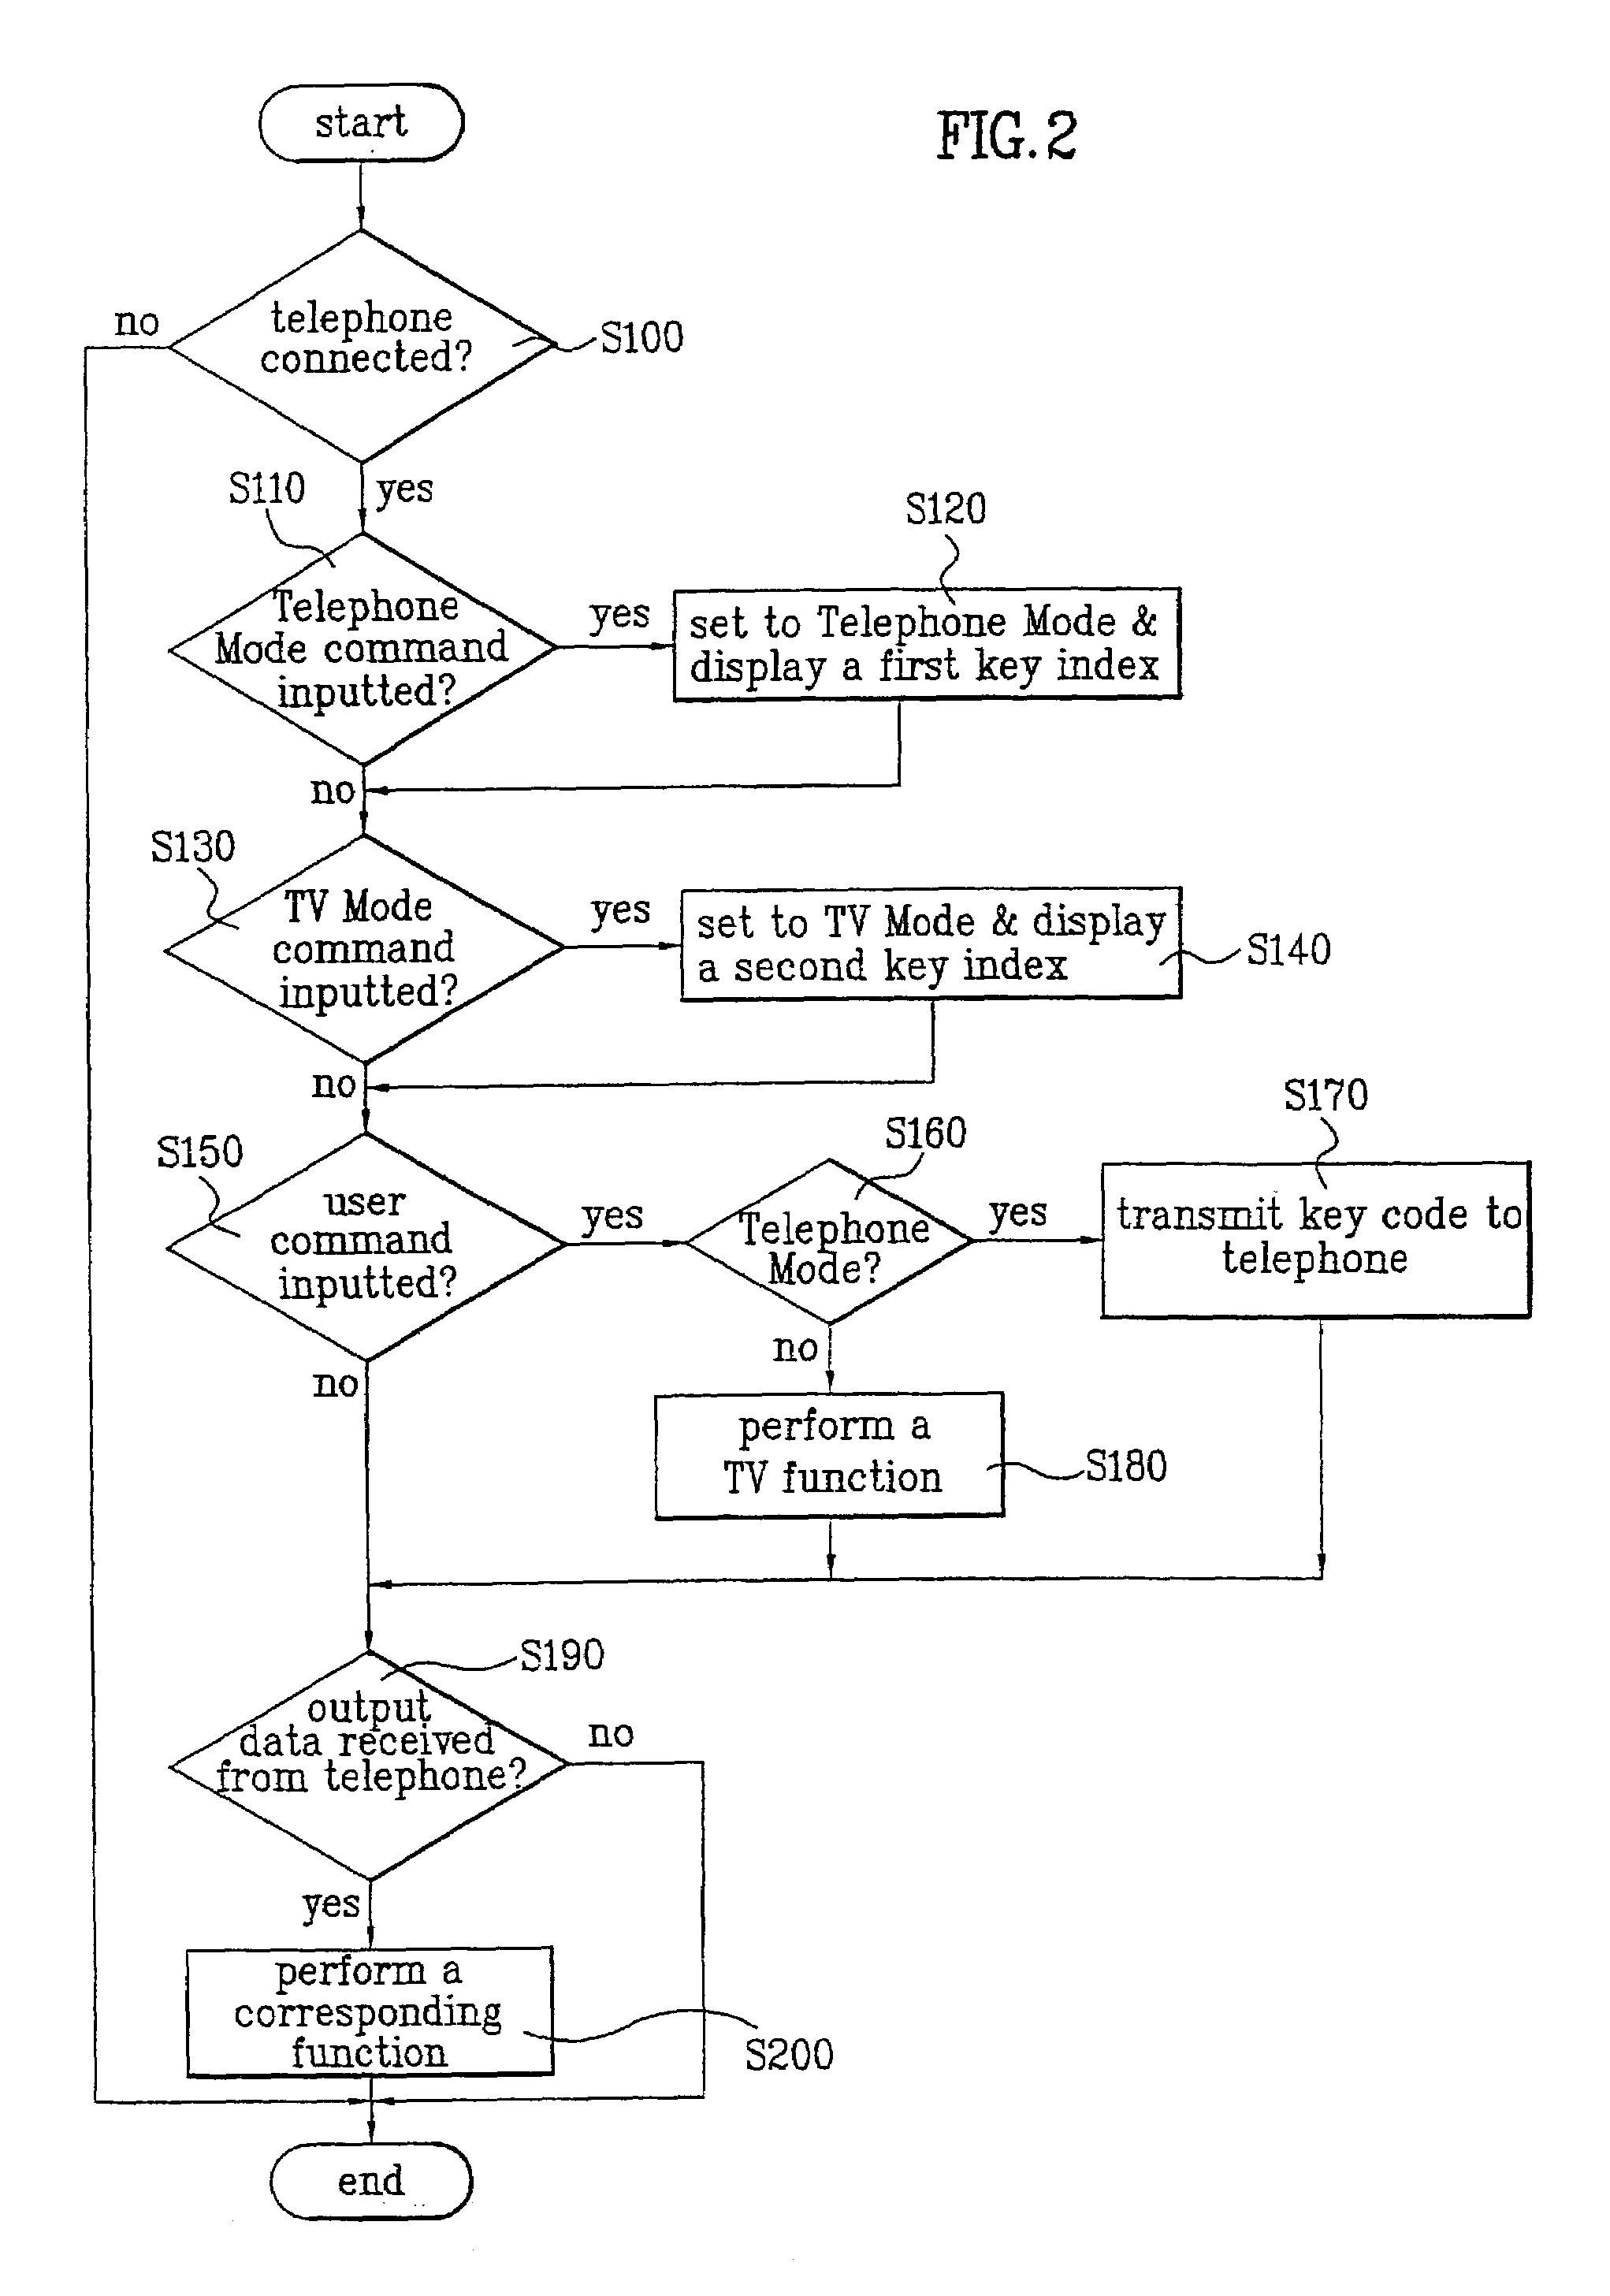 Apparatus and method of interacting with a mobile phone using a TV system